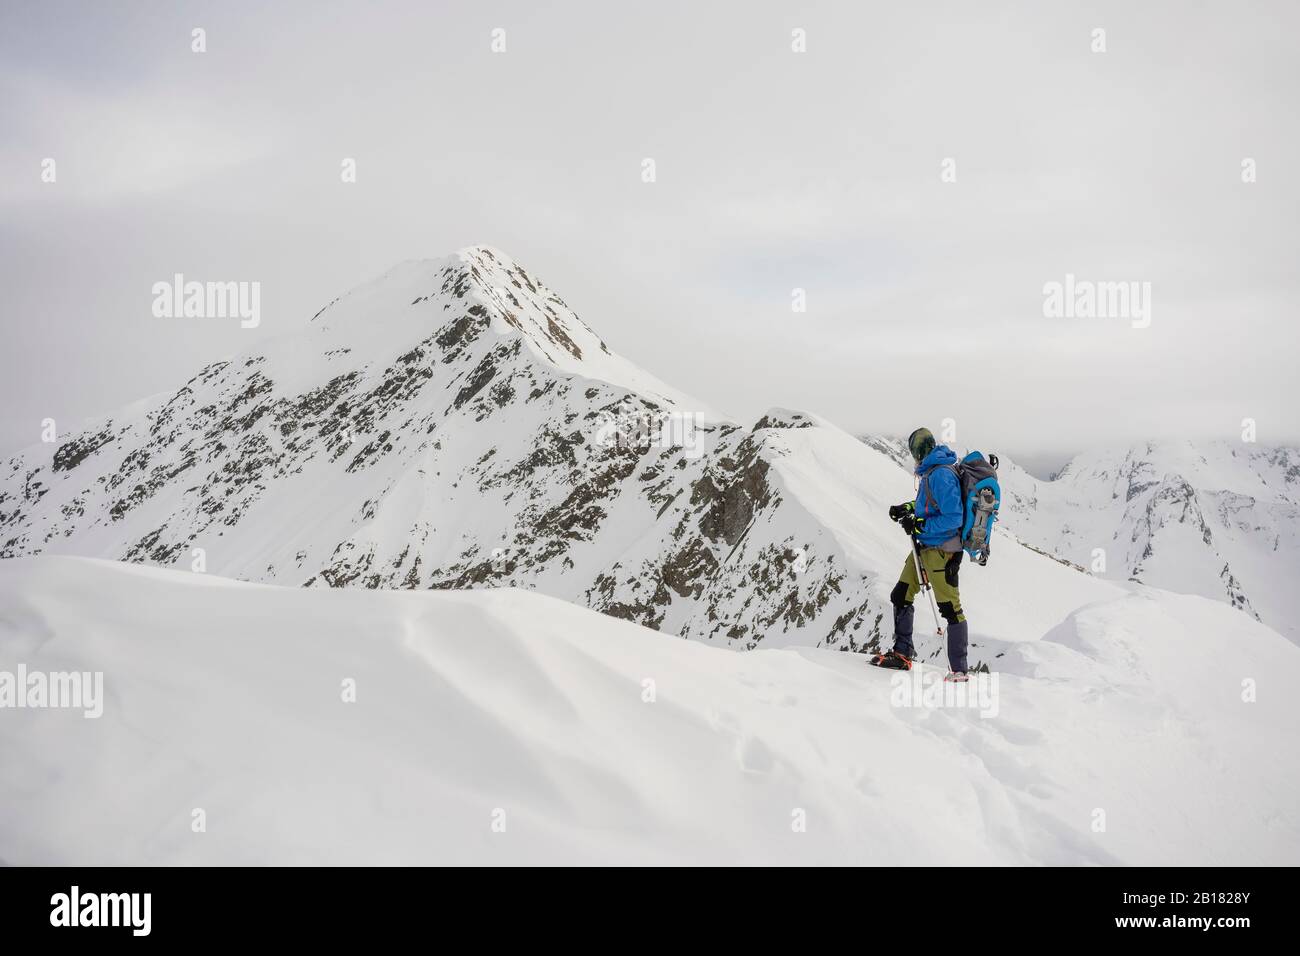 Man on an excursion on the crest of a snowy mountain, Lombardy, Valtellina, Italy Stock Photo